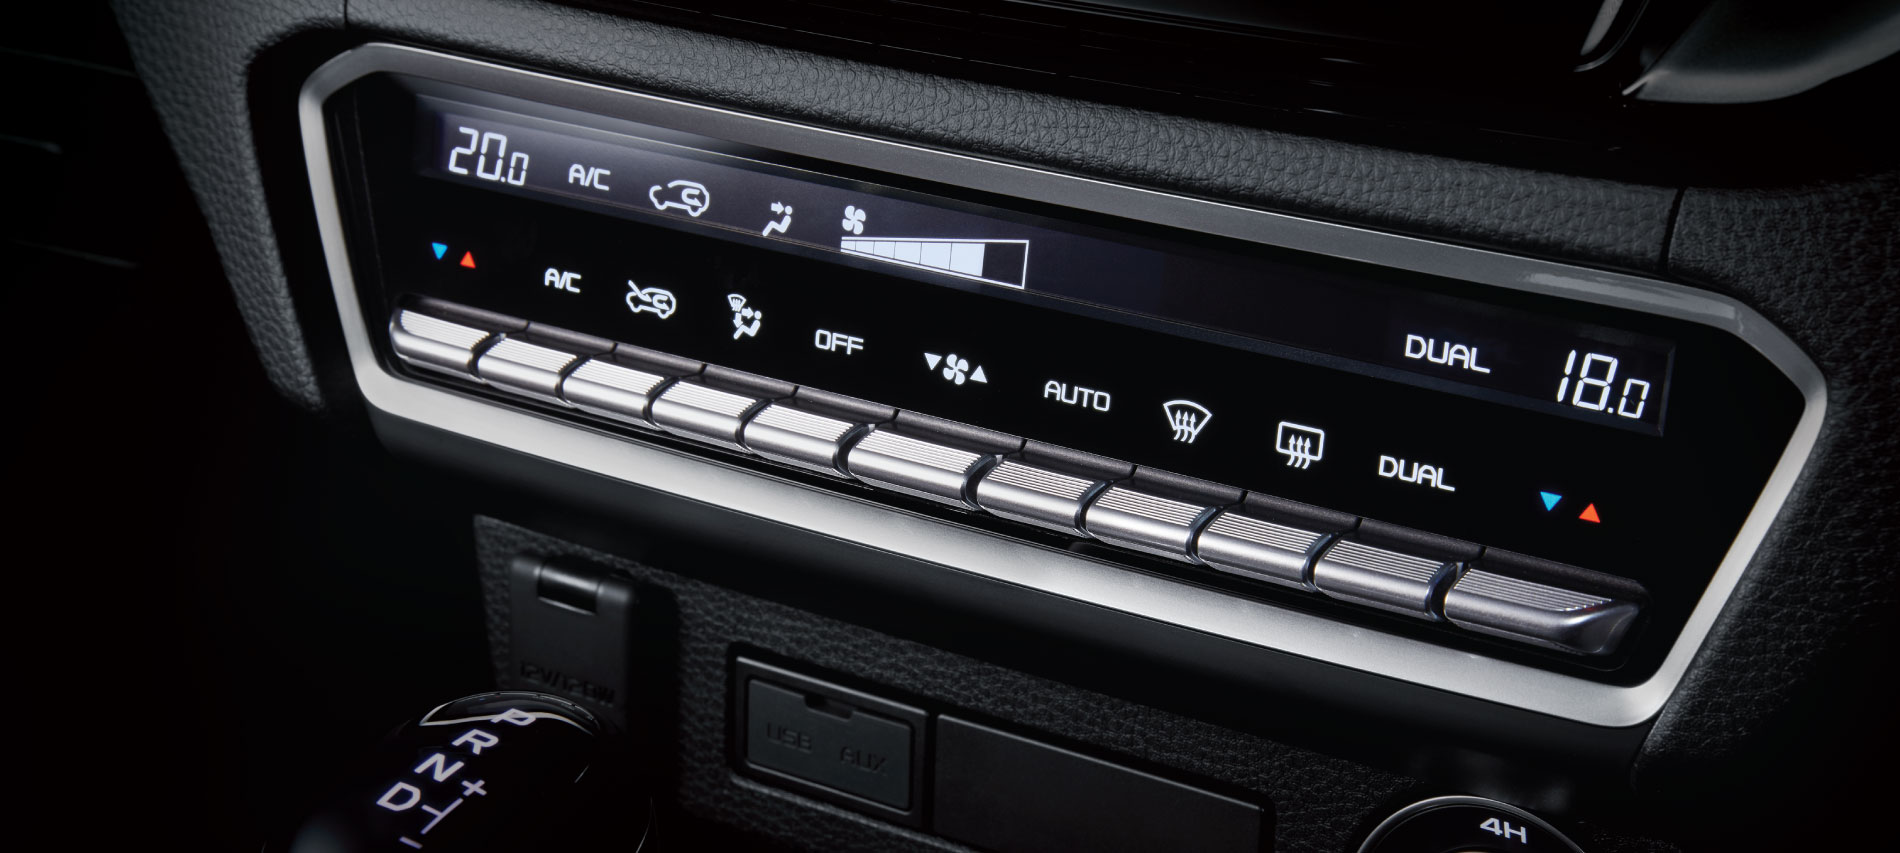 AUTOMATIC DUAL ZONE CLIMATE CONTROL